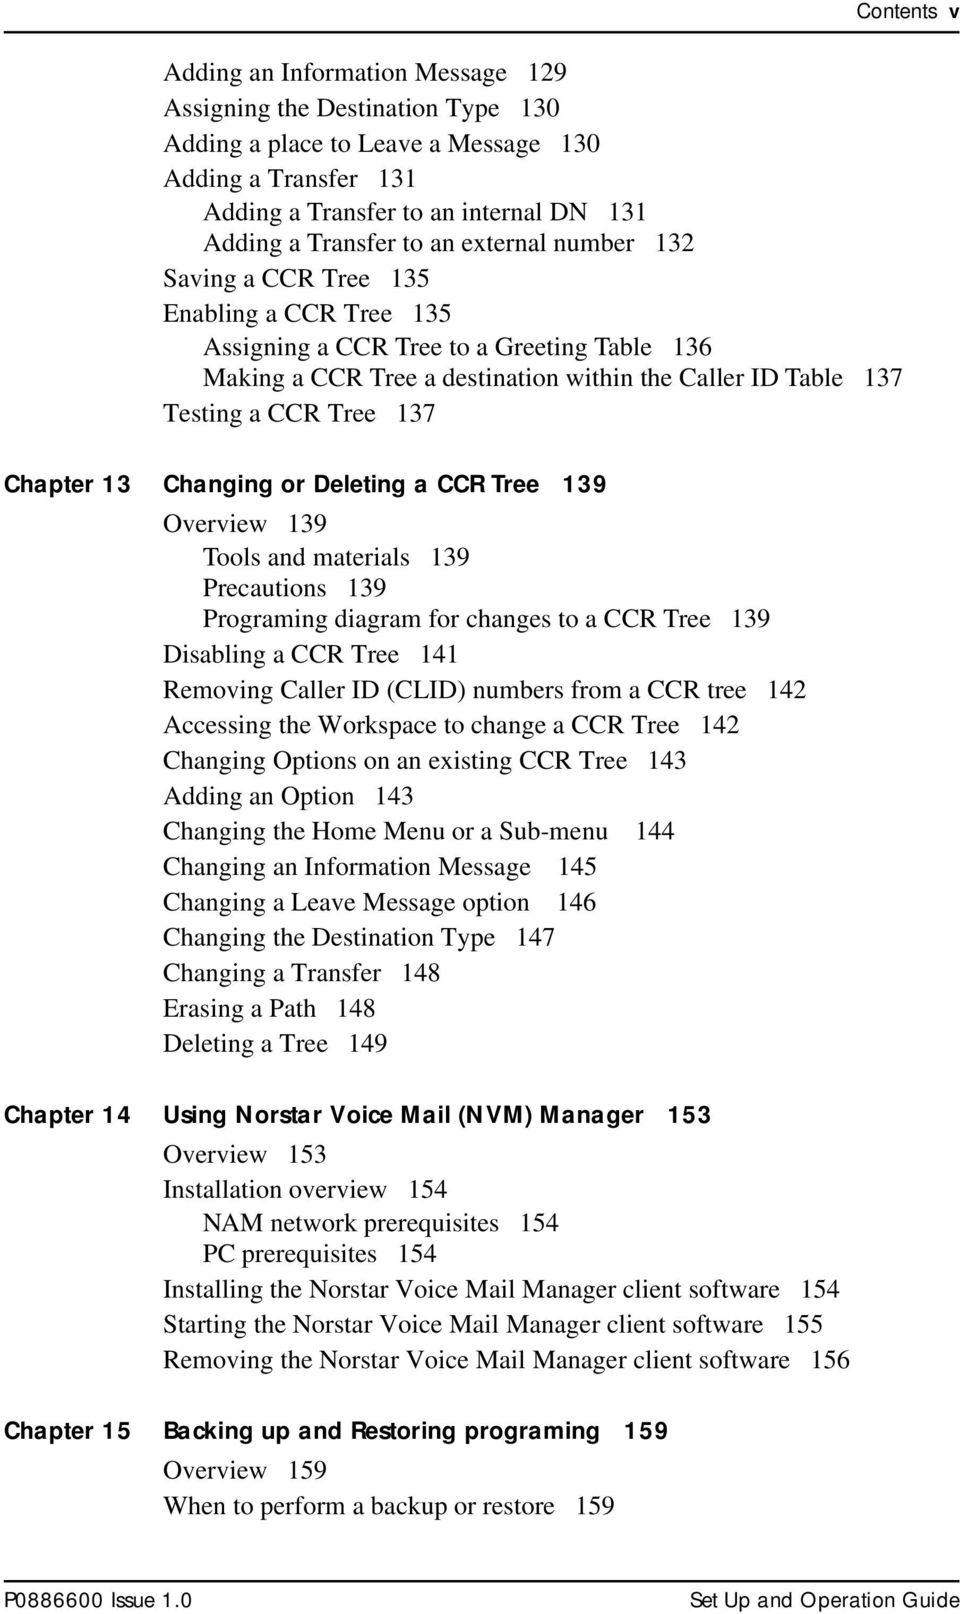 Contents v Chapter 13 Changing or Deleting a CCR Tree 139 Overview 139 Tools and materials 139 Precautions 139 Programing diagram for changes to a CCR Tree 139 Disabling a CCR Tree 141 Removing